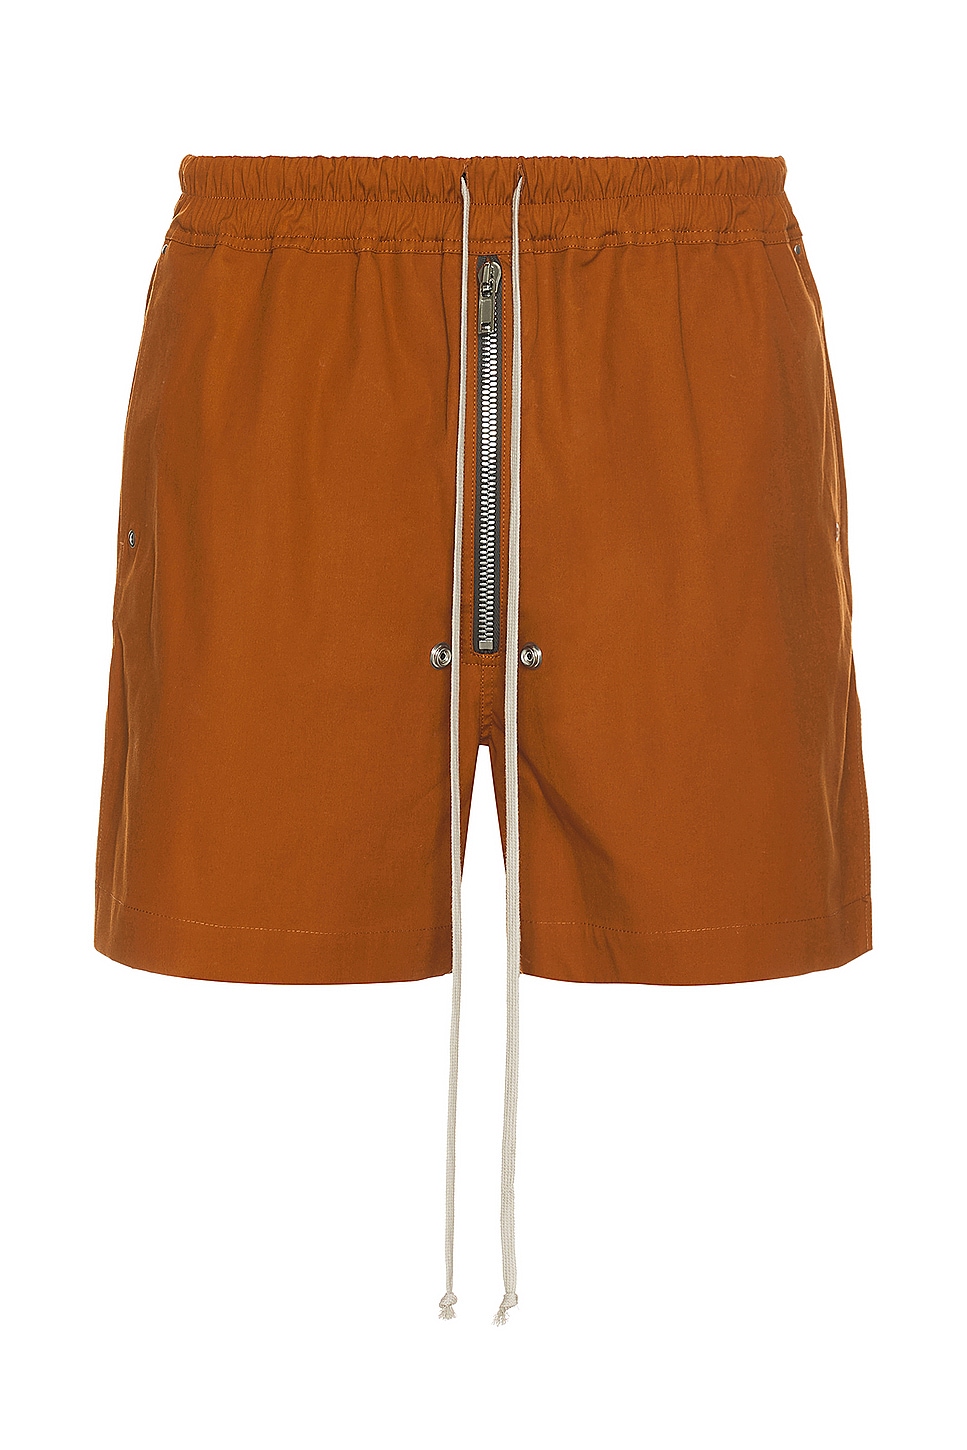 Image 1 of Rick Owens Bela Boxers in Clay